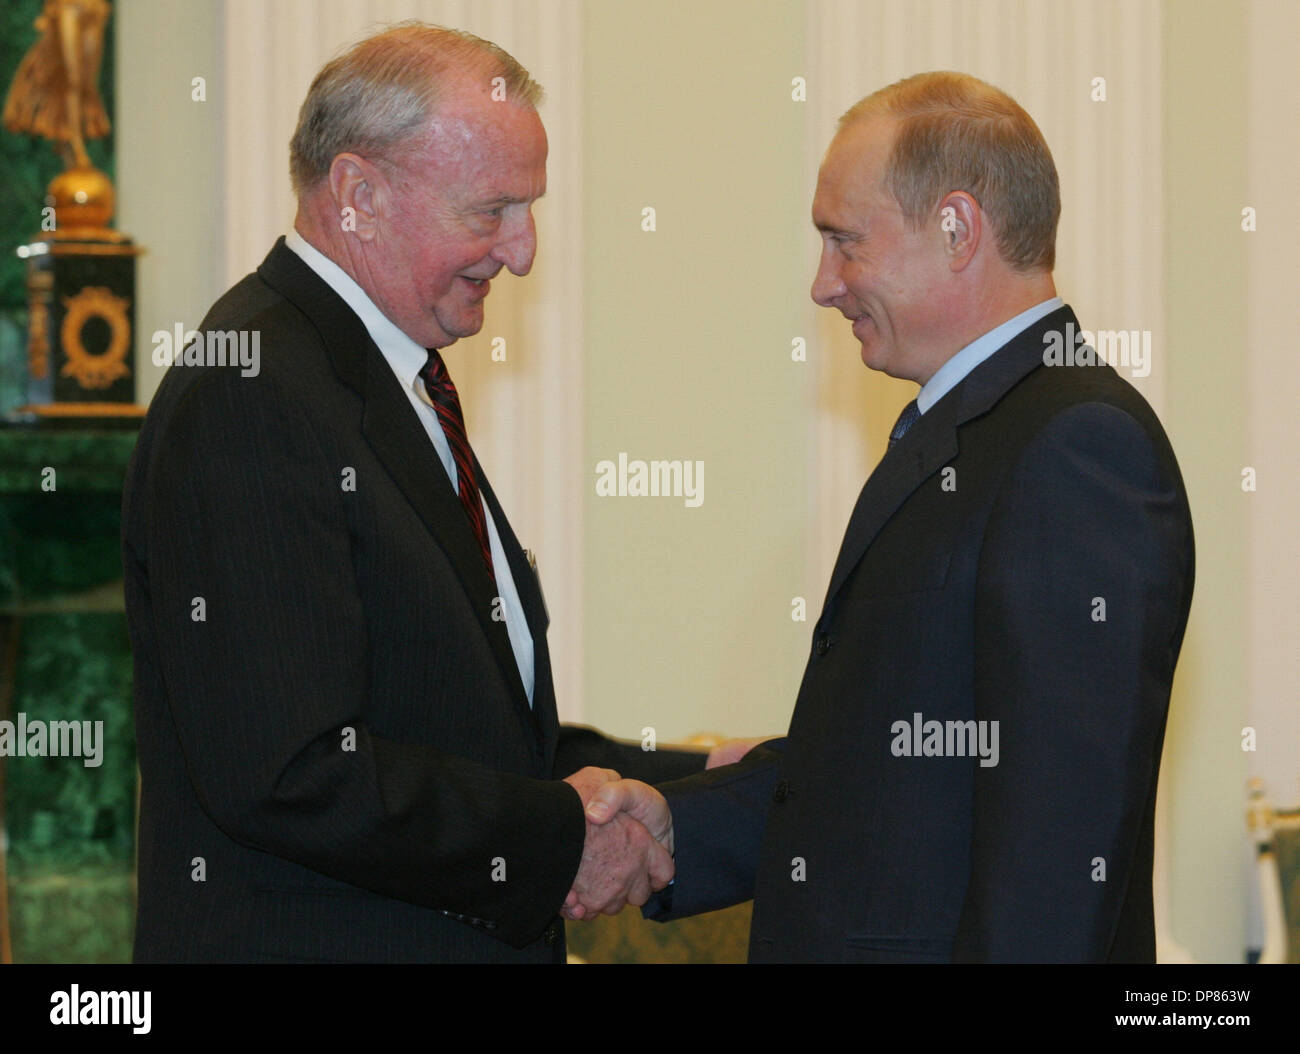 Vladimir Putin and president of international students sport unity (FISU)George Killian. (Credit Image: © PhotoXpress/ZUMA Press) RESTRICTIONS: North and South America Rights ONLY! Stock Photo